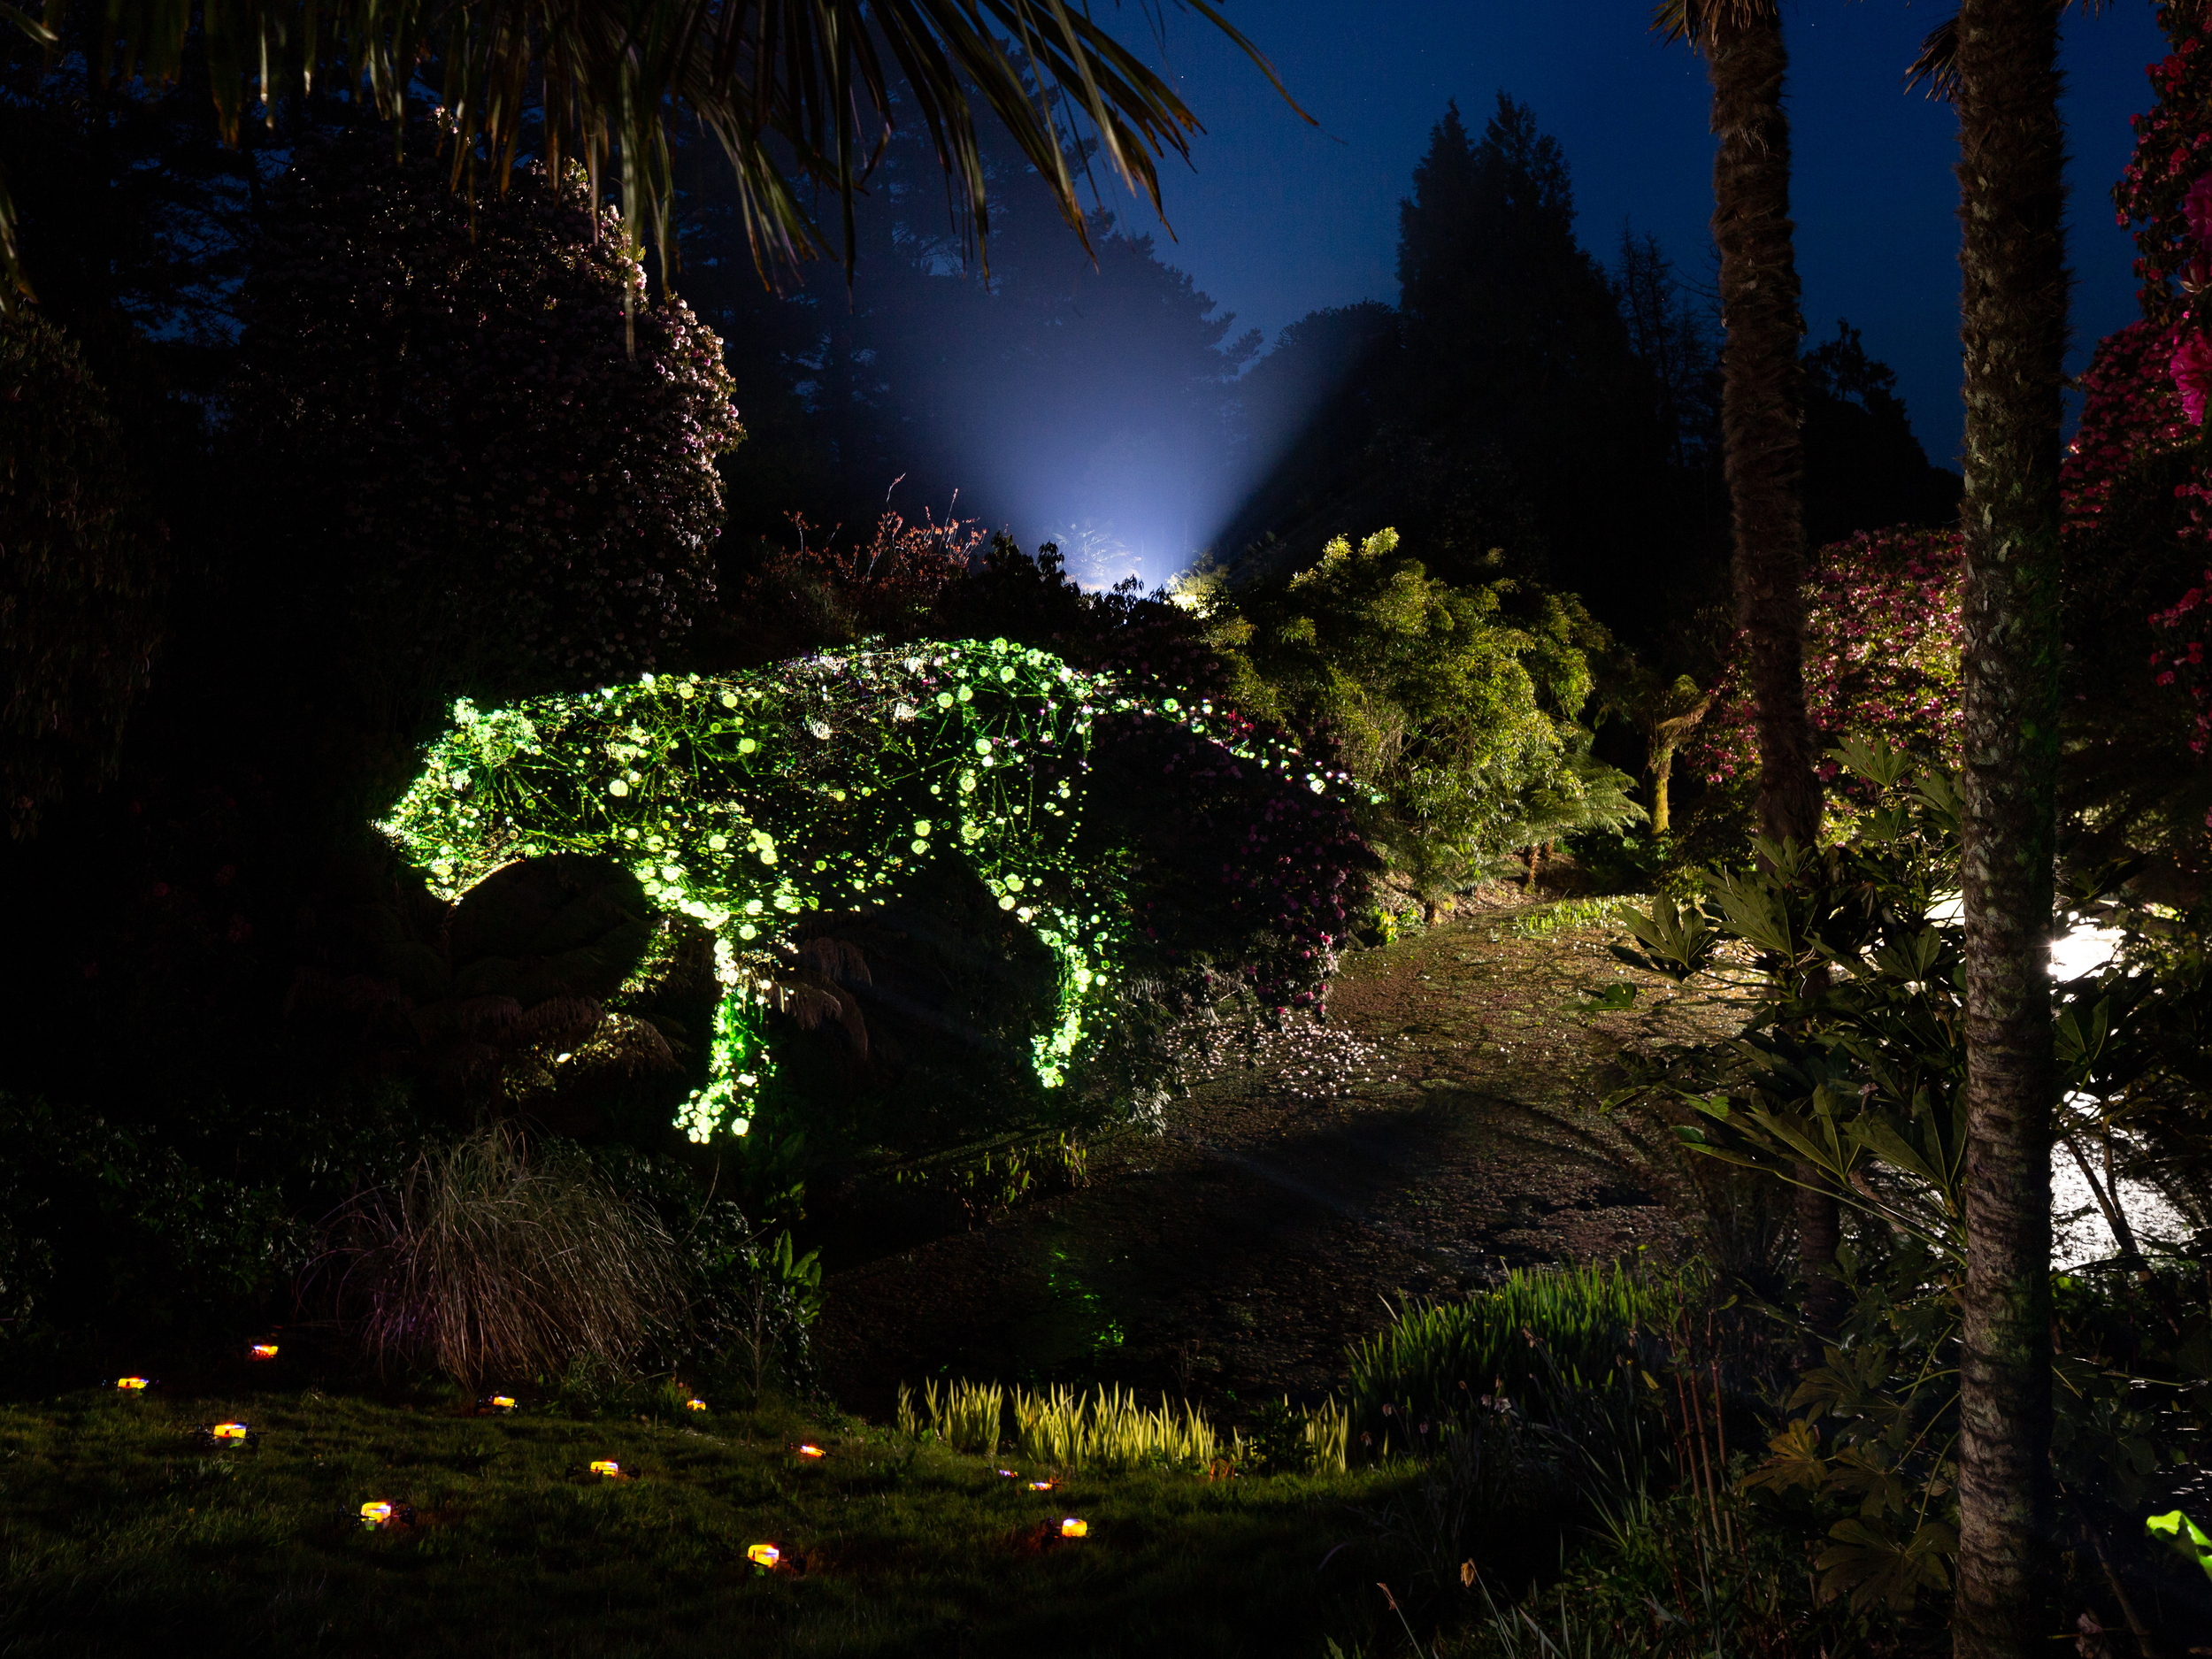 A jaguar is projected in green scattered lights onto a lush nightime landscape